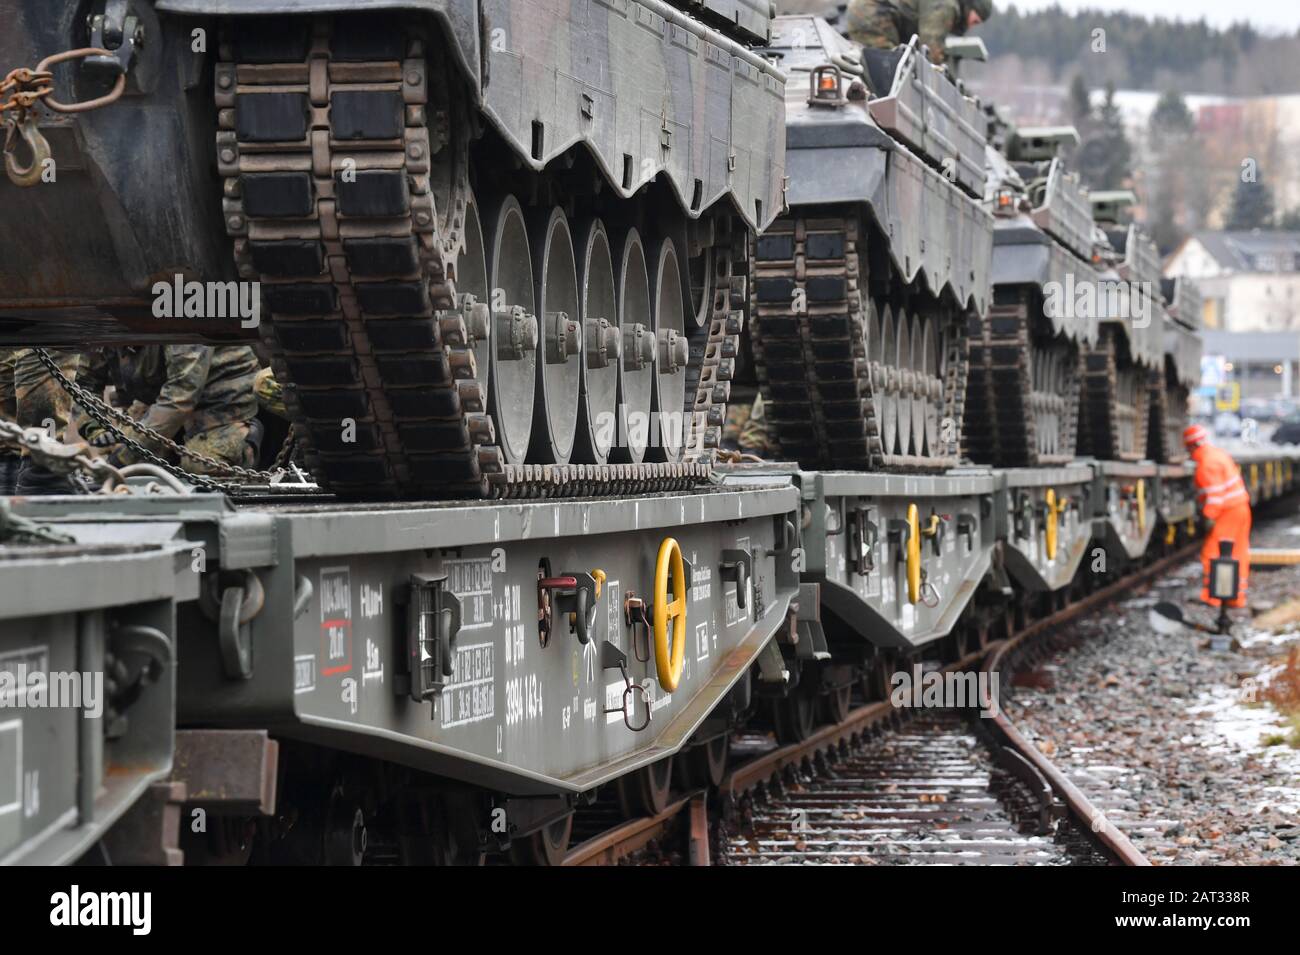 30 January 2020, Saxony, Marienberg: Infantry fighting vehicles 'Marder' of the Panzergrenadierbataillon 371 from Marienberg in Saxony are loaded onto railway goods trailers. With the transport, tanks 'Marder', recovery tanks 'Büffel' and wheeled vehicles go to Rukla in Lithuania. The Panzergrenadierbataillon 371 replaces there the Bataillon 391 from Bad Salzungen after its six-month engagement. The 'Marienberger Jäger' are participating in the contract for the second time. The main task is to show presence and practice together with multinational partners and the Lithuanian armed forces. Sinc Stock Photo